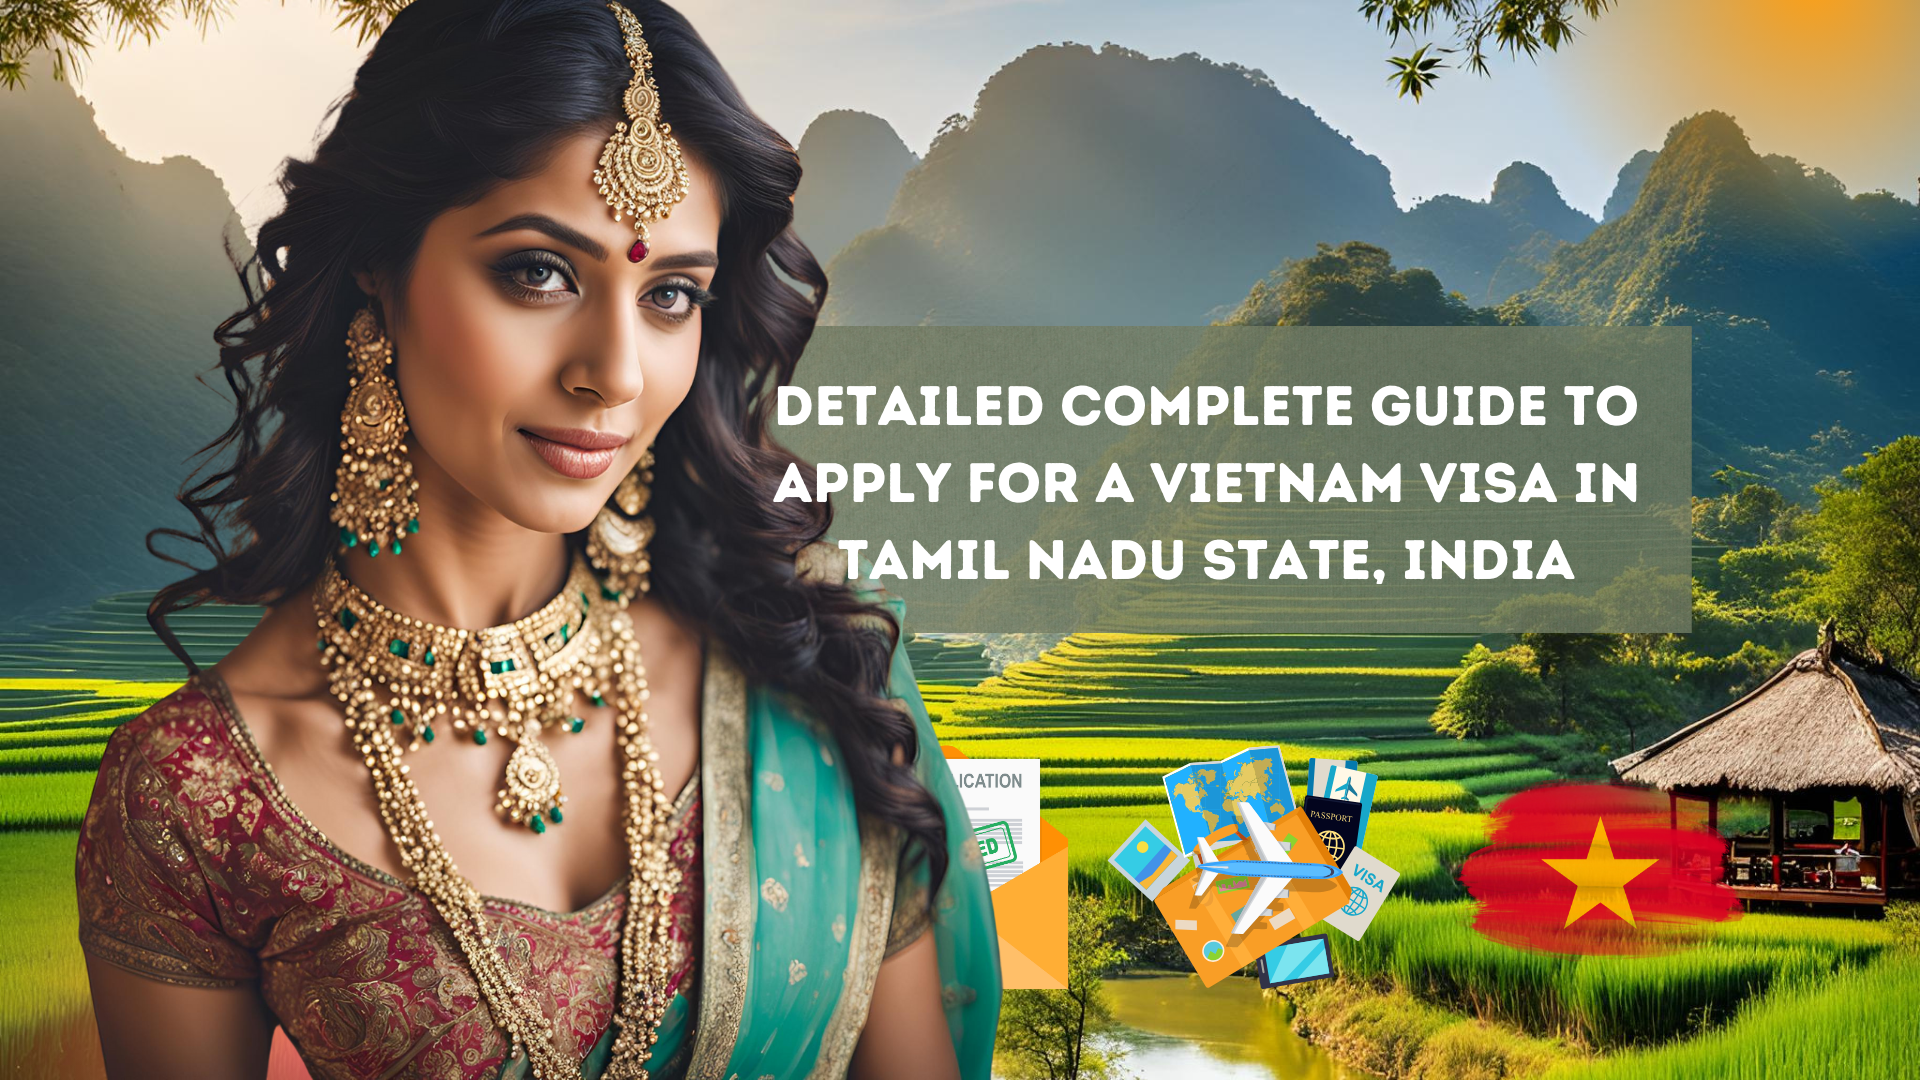 Detailed Complete Guide to Apply for a Vietnam Visa in Tamil Nadu State, India